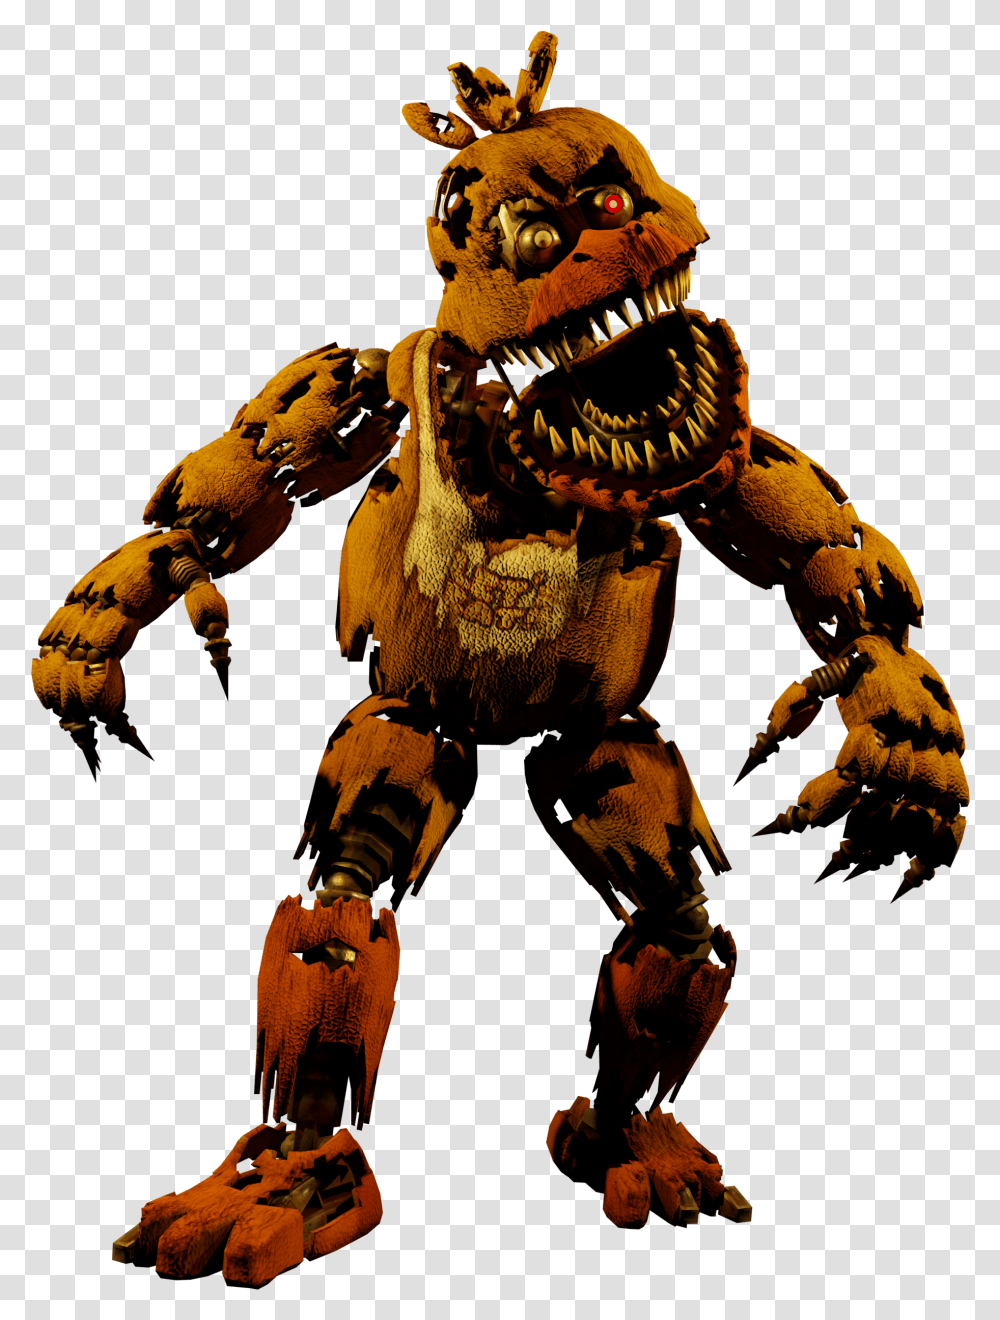 Triple A Fazbear Wiki Fnaf Help Wanted Nightmare Chica, Person, Dragon, Statue, Sculpture Transparent Png